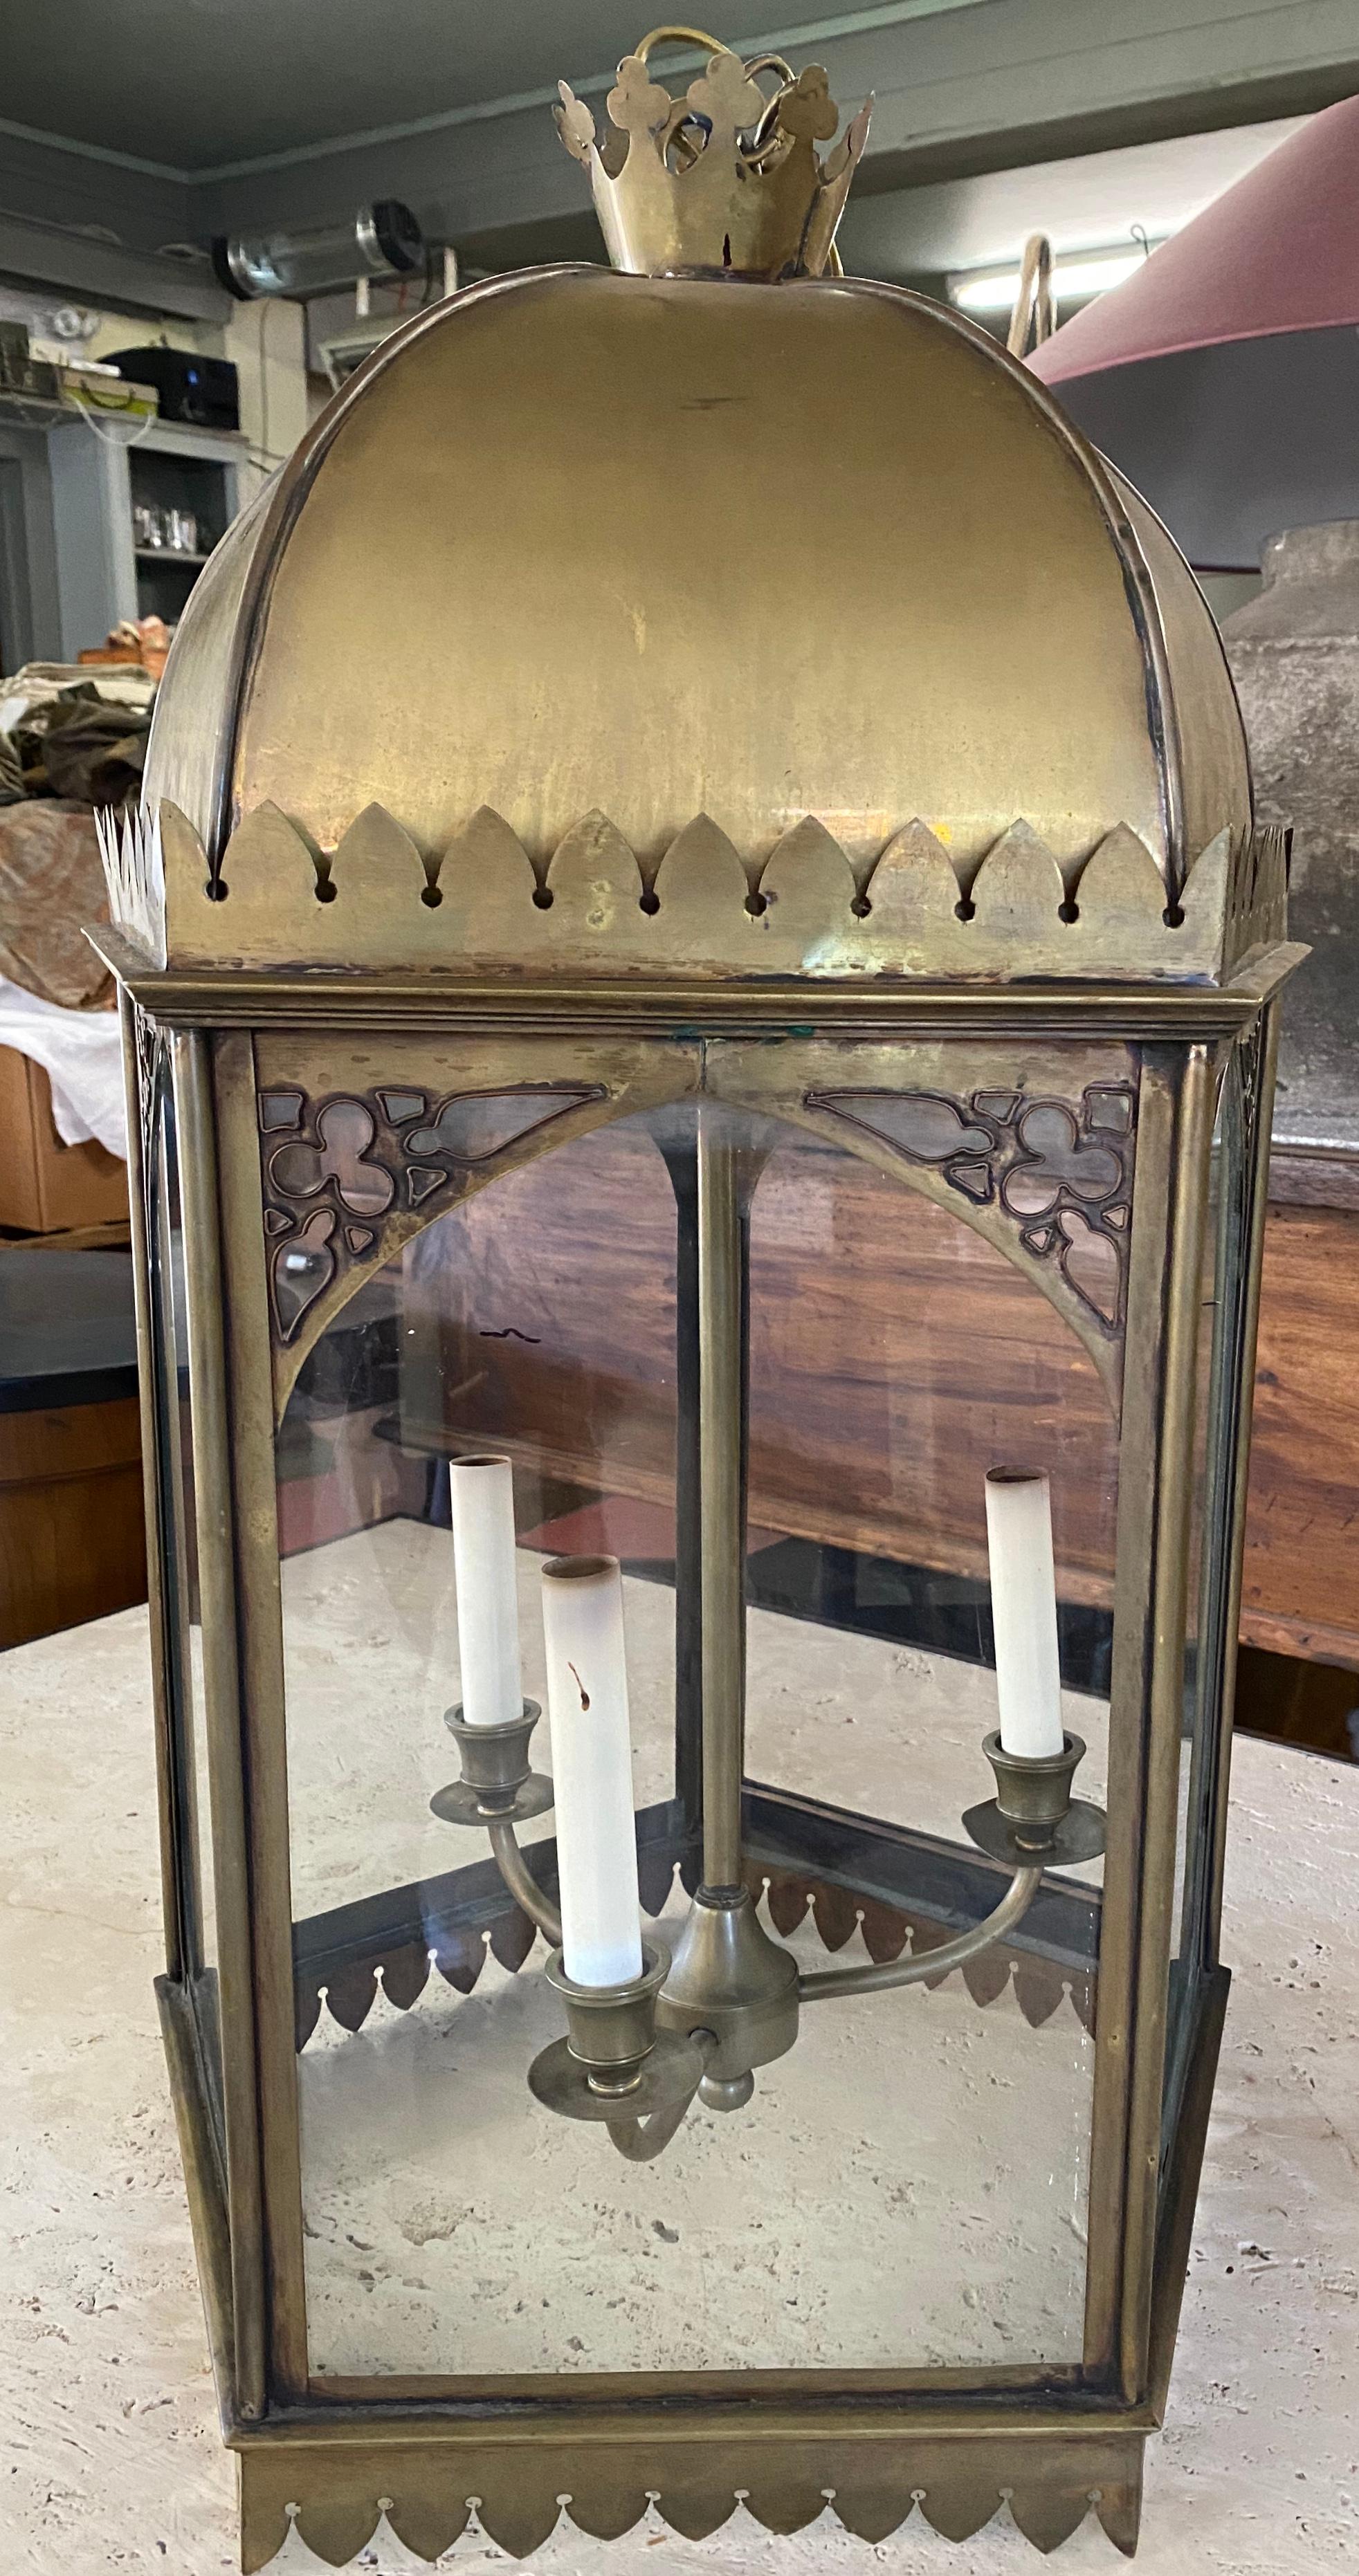 Large and impressive Gothic style 5 sided brass and glass encased hanging lantern electrified with 3-light. Wonderful aged brass patina.